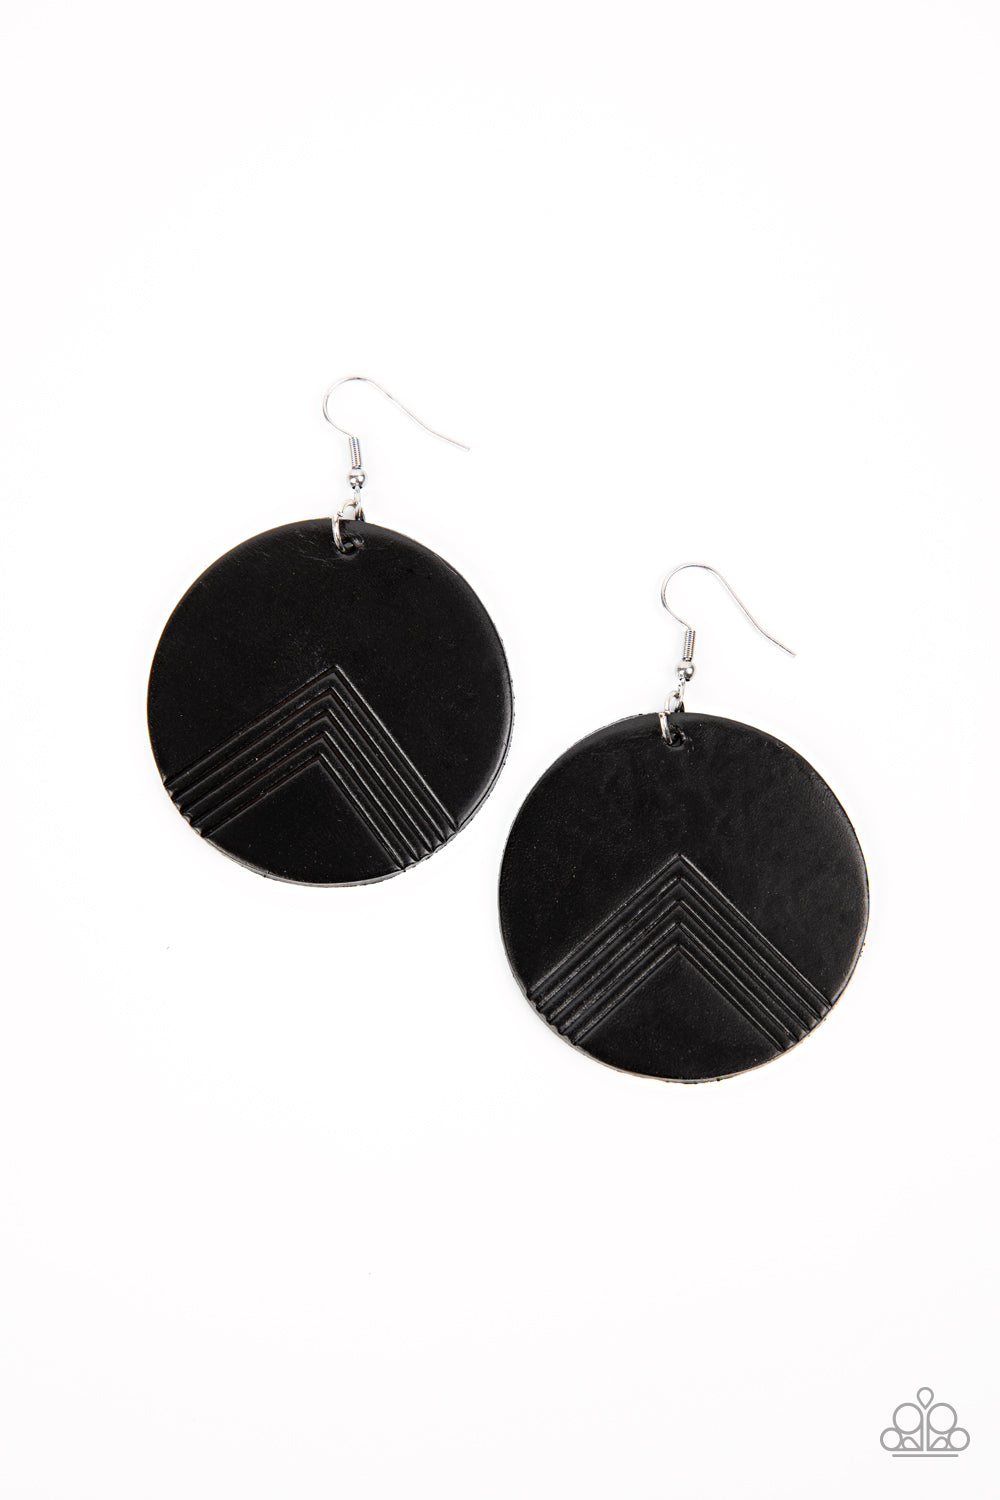 On the Edge of Edgy Black Leather Earring - Paparazzi Accessories  A black leather disc is etched in an angular geometric accent, creating a modern look. Earring attaches to a standard fishhook fitting.  Sold as one pair of earrings.  P5SE-BKXX-275XX